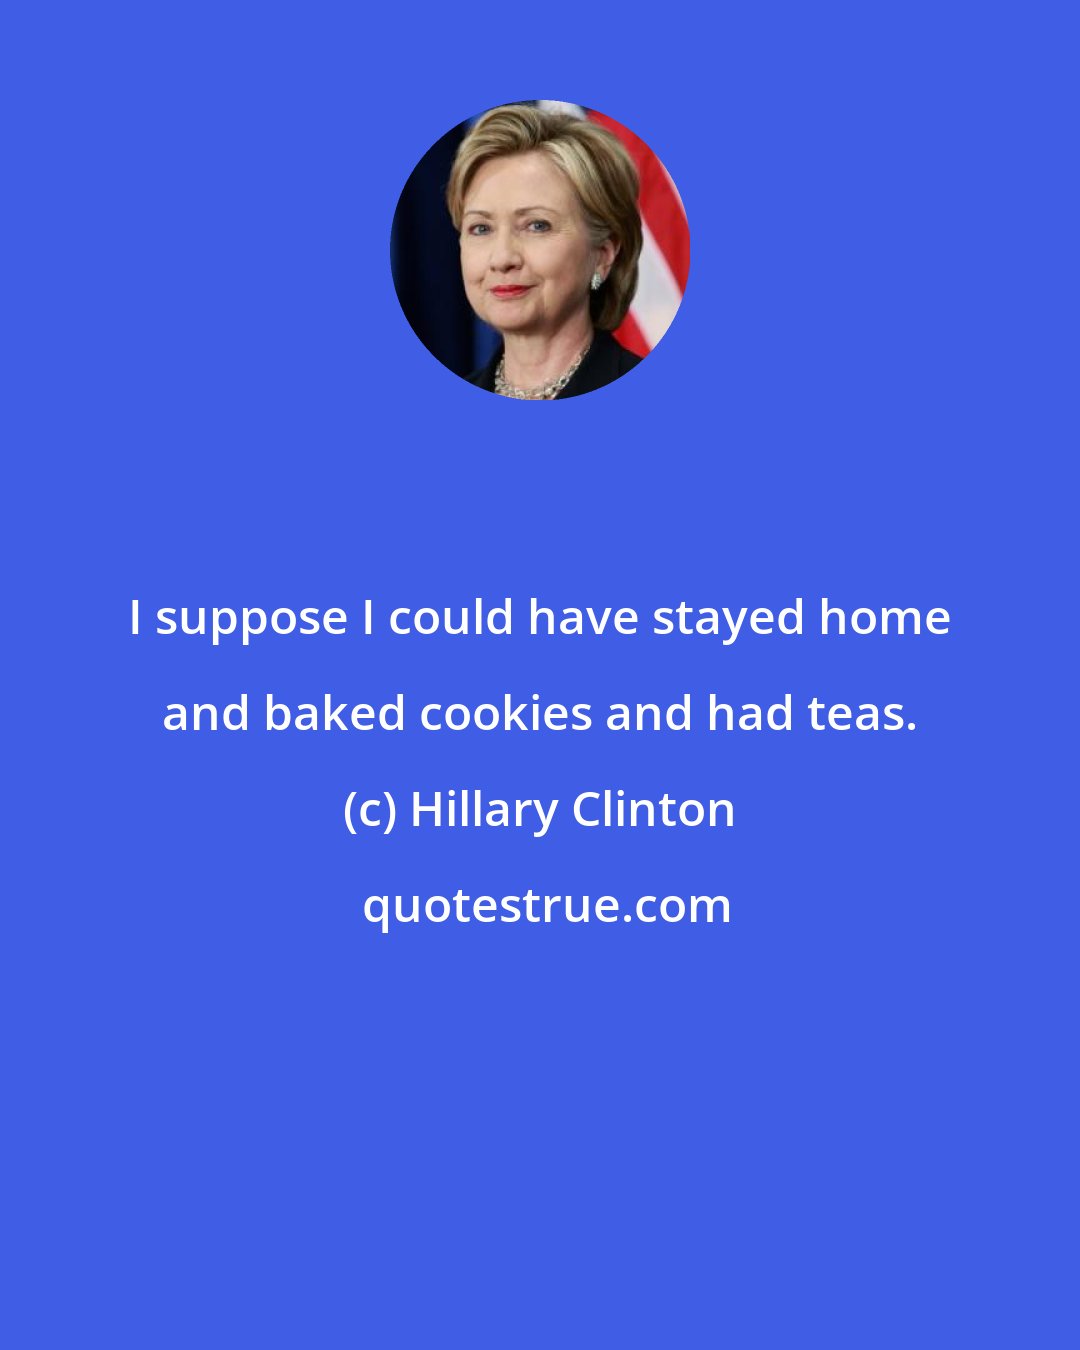 Hillary Clinton: I suppose I could have stayed home and baked cookies and had teas.